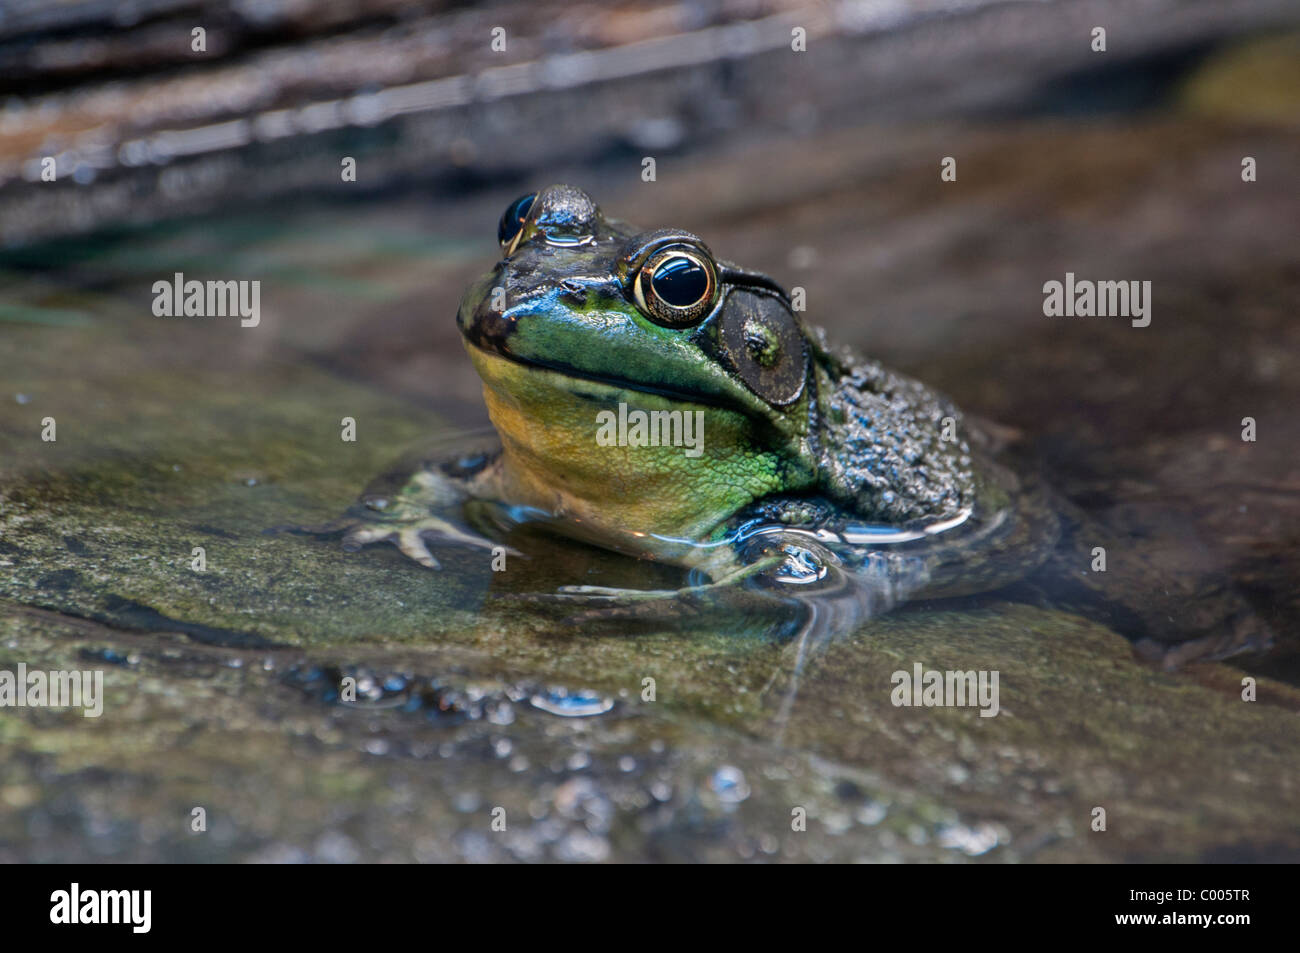 A partly-submerged Green Frog. Stock Photo